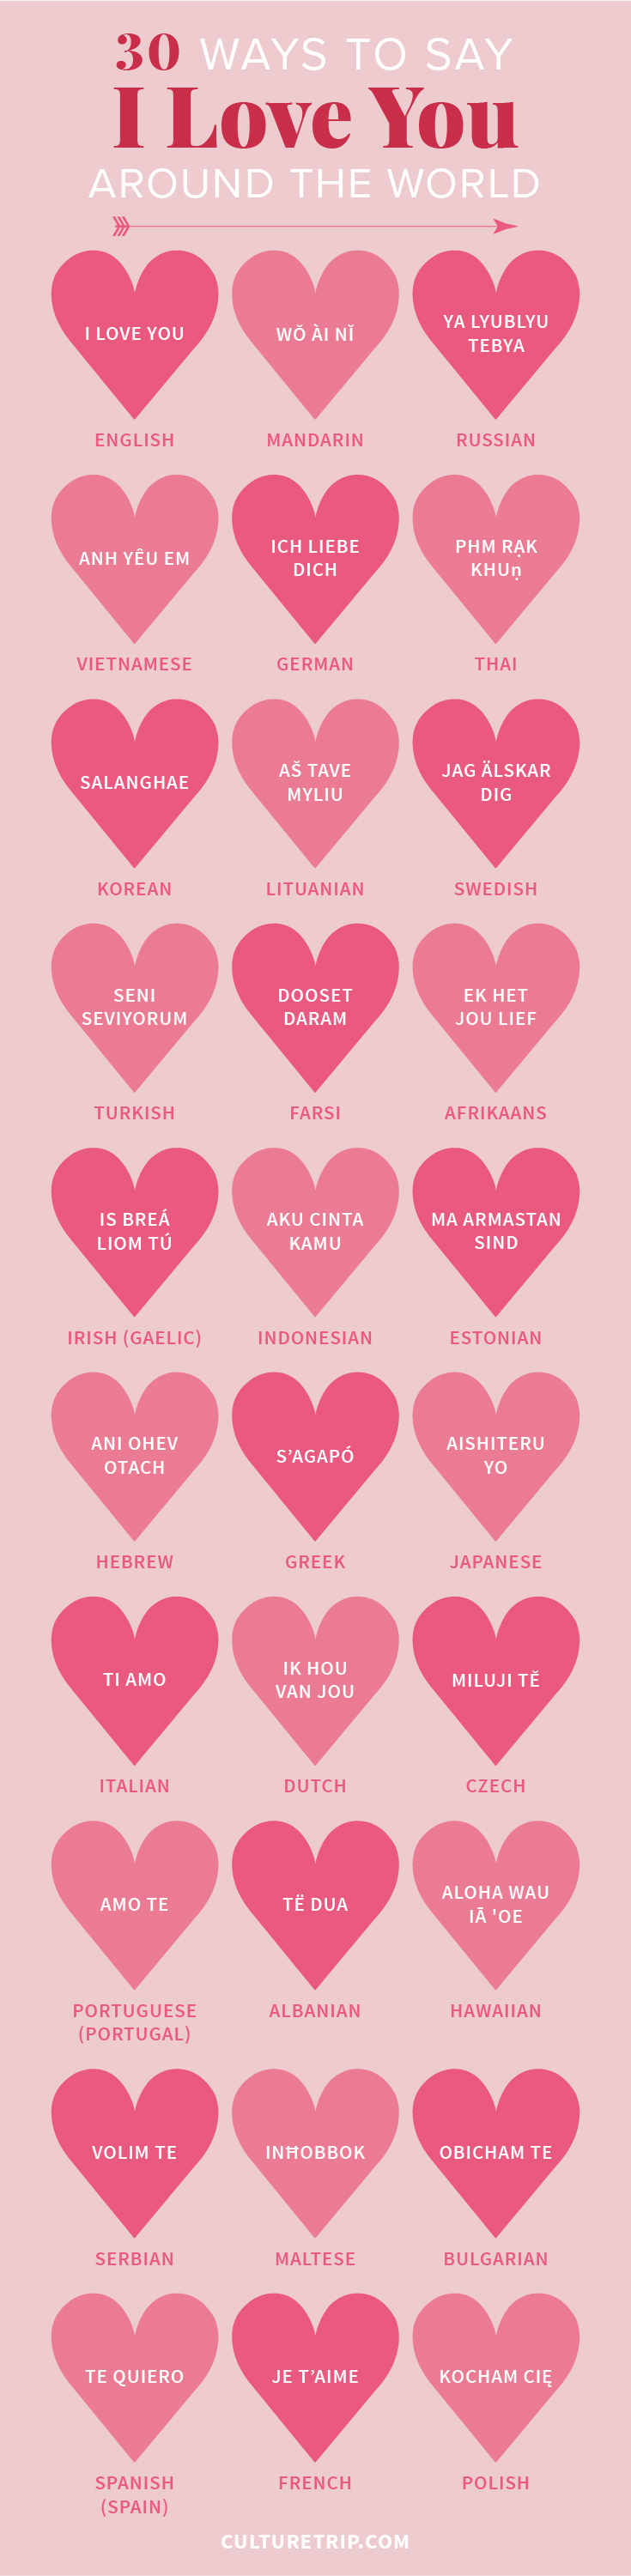 Cute way of saying i love you in a text 30 Ways To Say I Love You Around The World Infographic